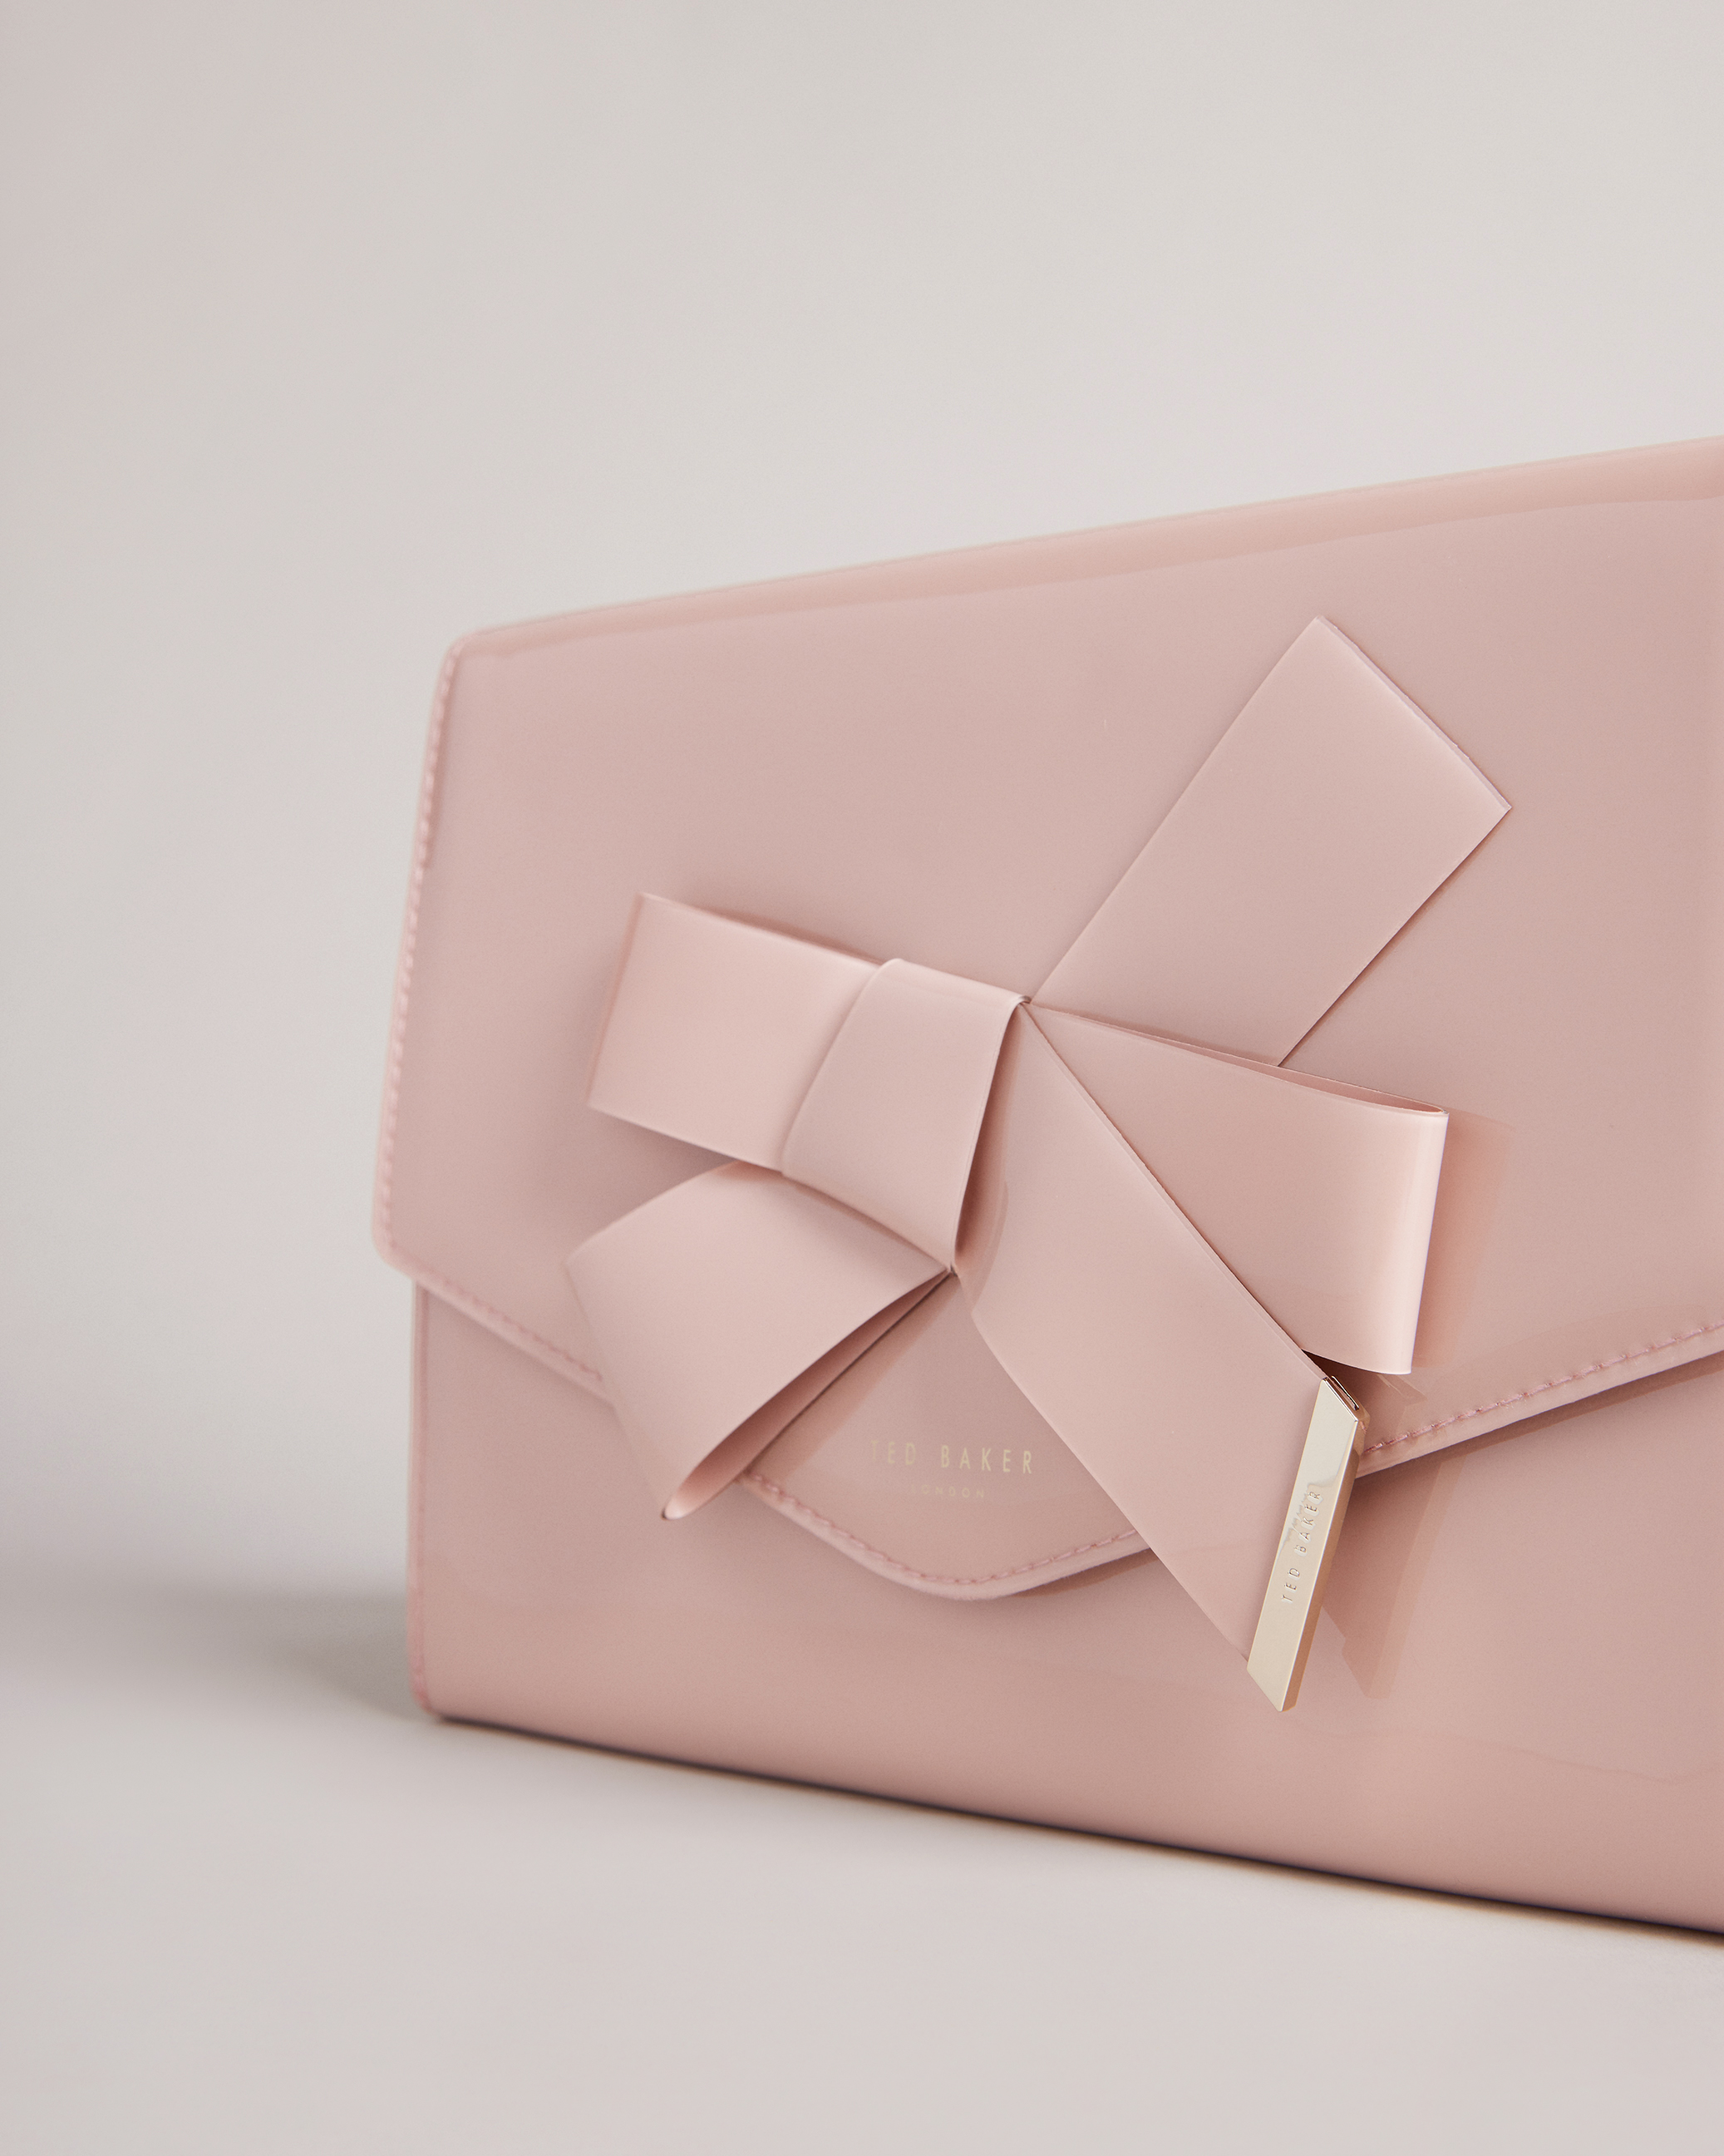 NWT - Ted Baker London - LUANNE - Bow Envelope Pouch - Rose Gold - $49